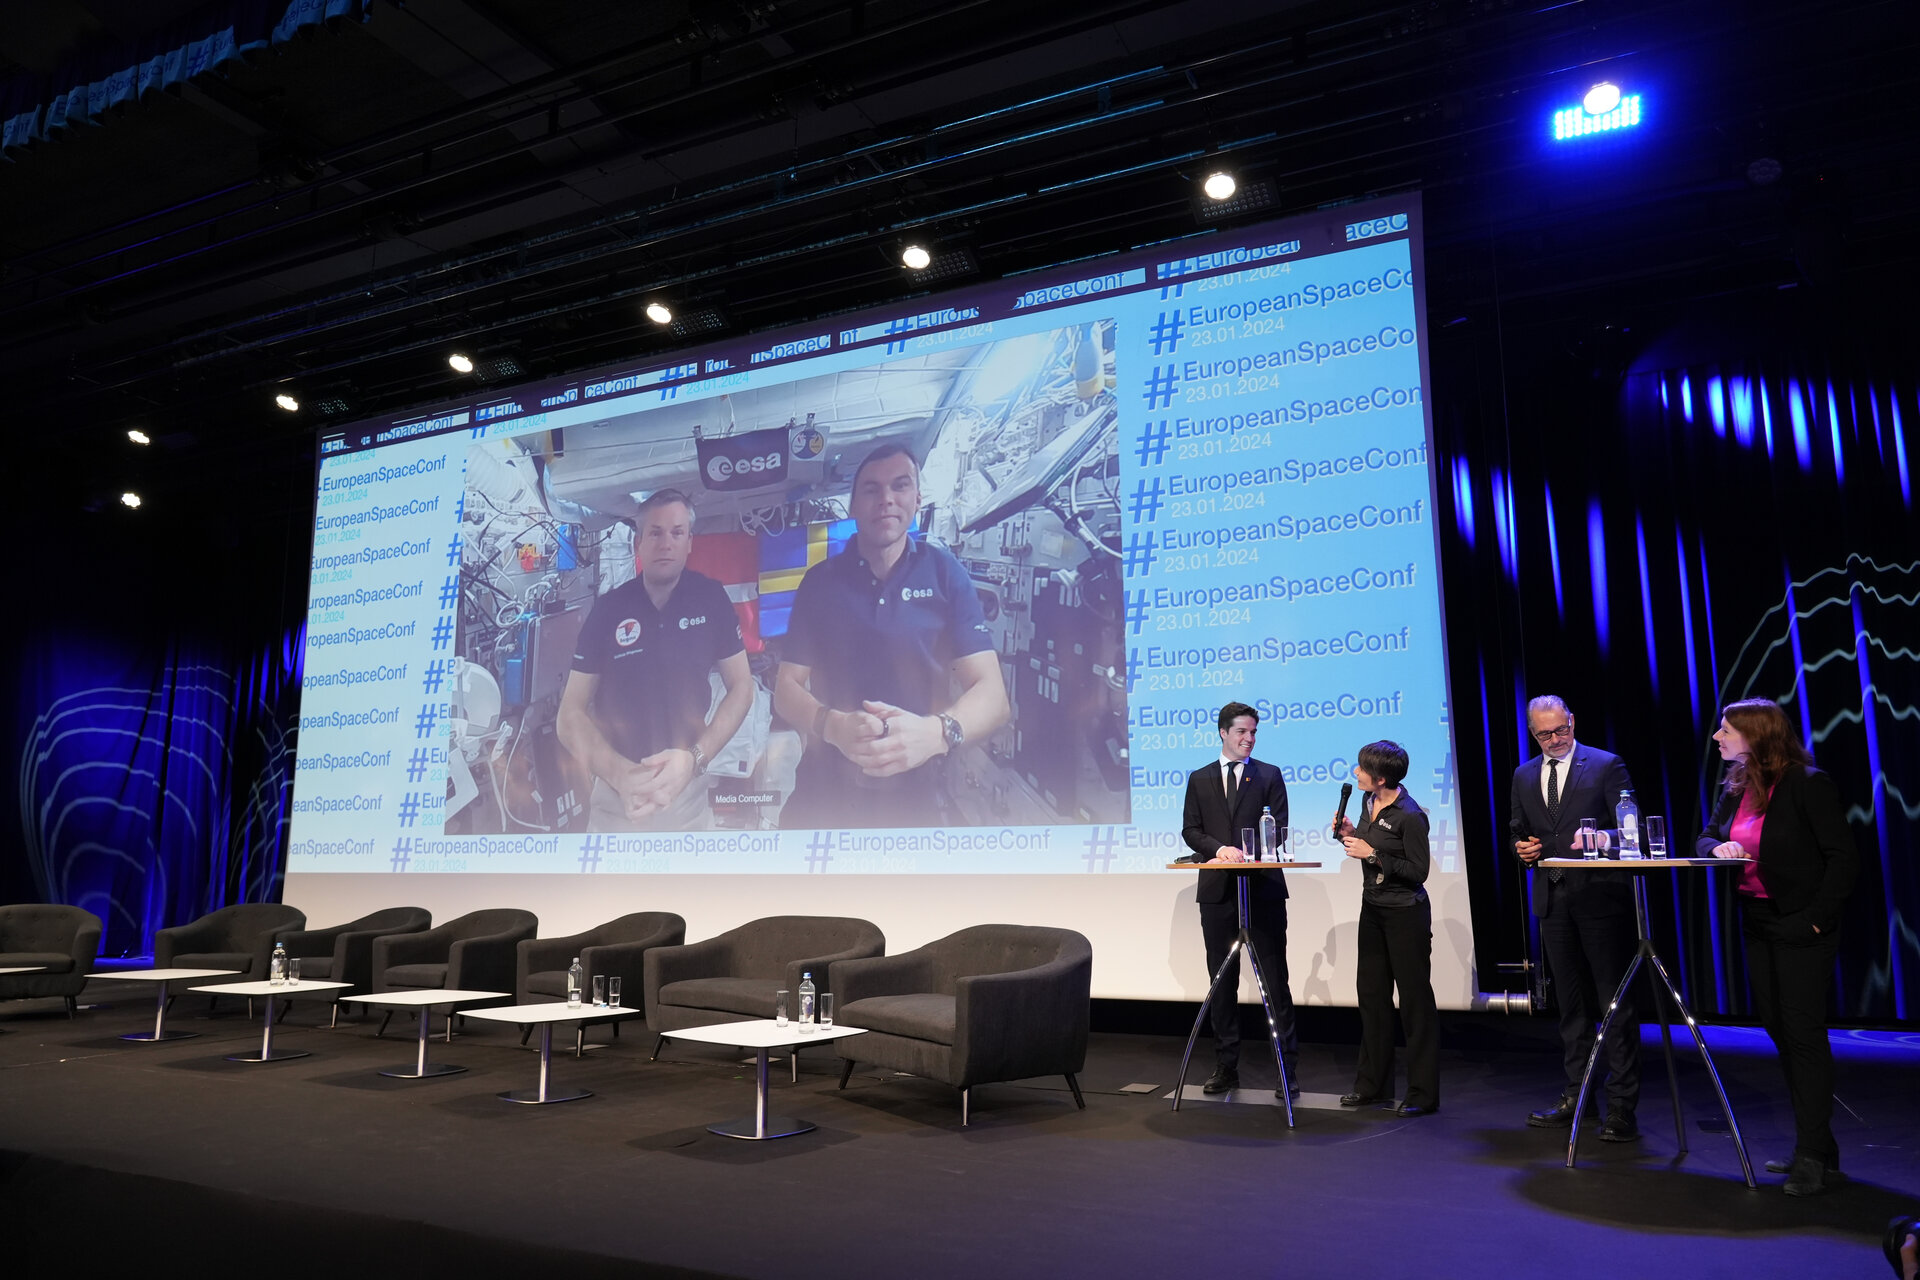 Inflight call with ESA Astronaut Andreas Mogensen and ESA project astronaut Marcus Wandt during the 16th European Space Conference.